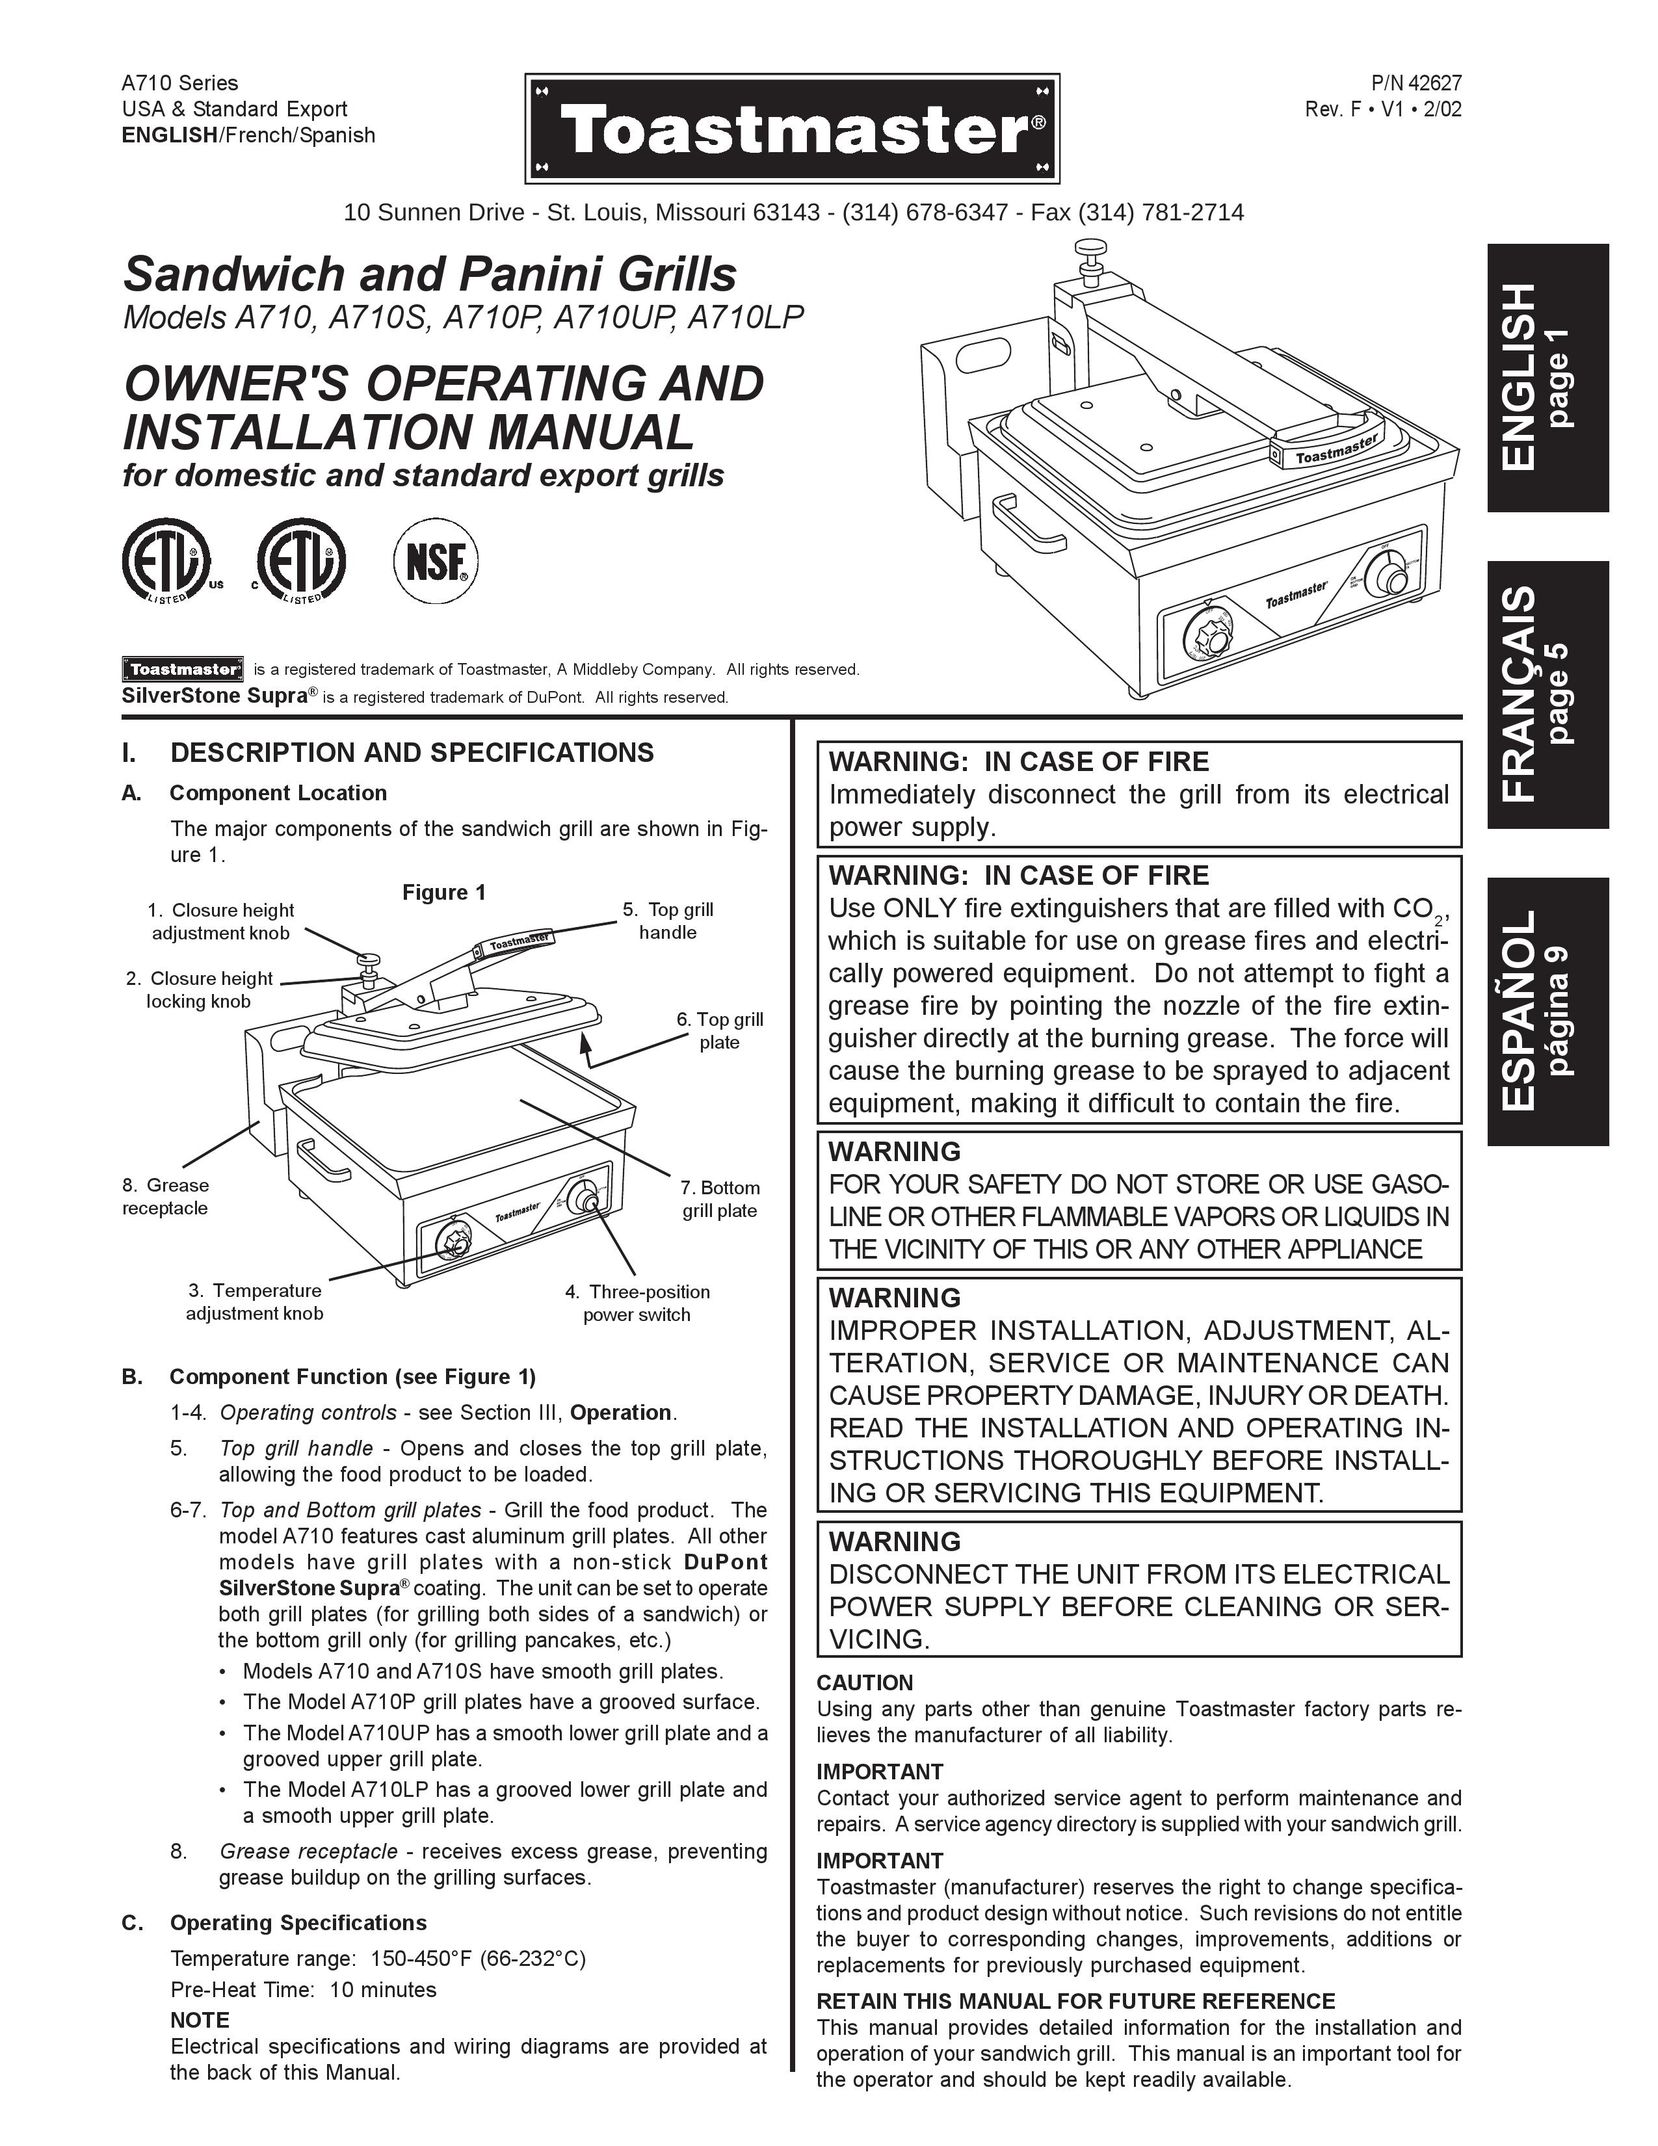 Toastmaster A710UP Kitchen Grill User Manual